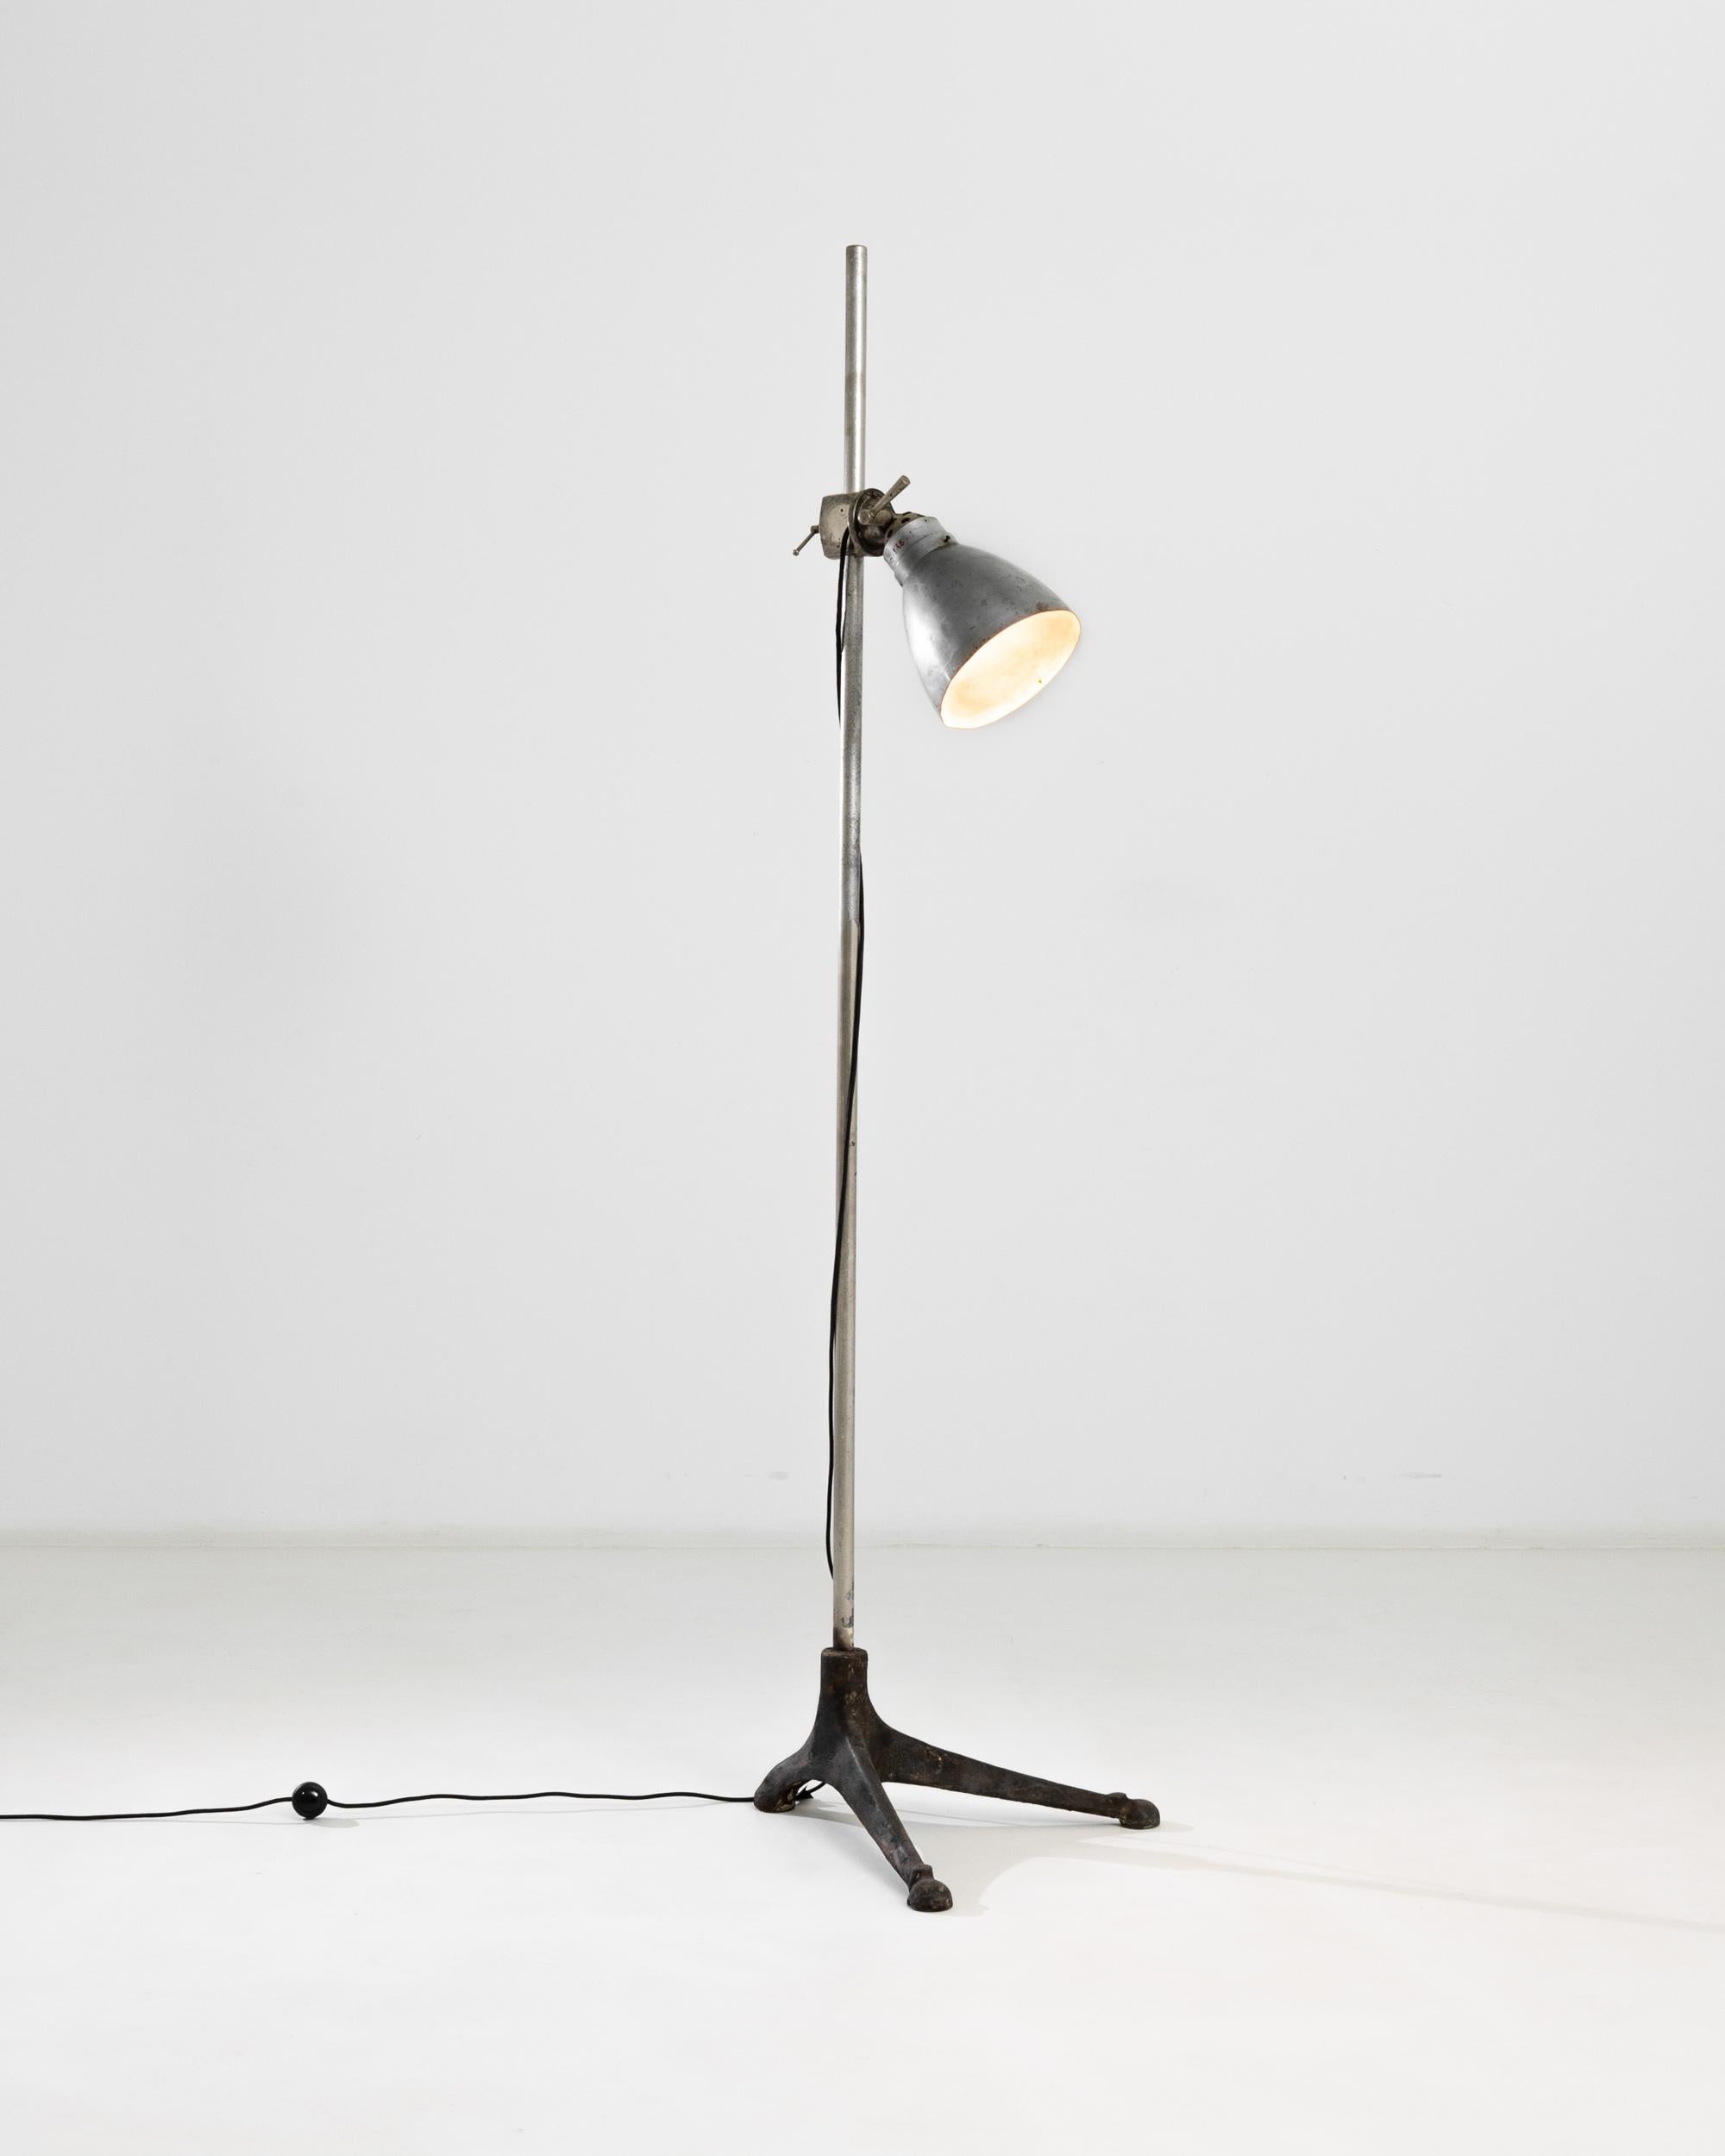 A 20th century metal floor lamp produced in France, this vintage piece features an adjustable shade and irregular wrought iron tripod feet, lending the lamp a peculiar profile. The tall pole elevates above eighty inches, giving the lamp a wide range